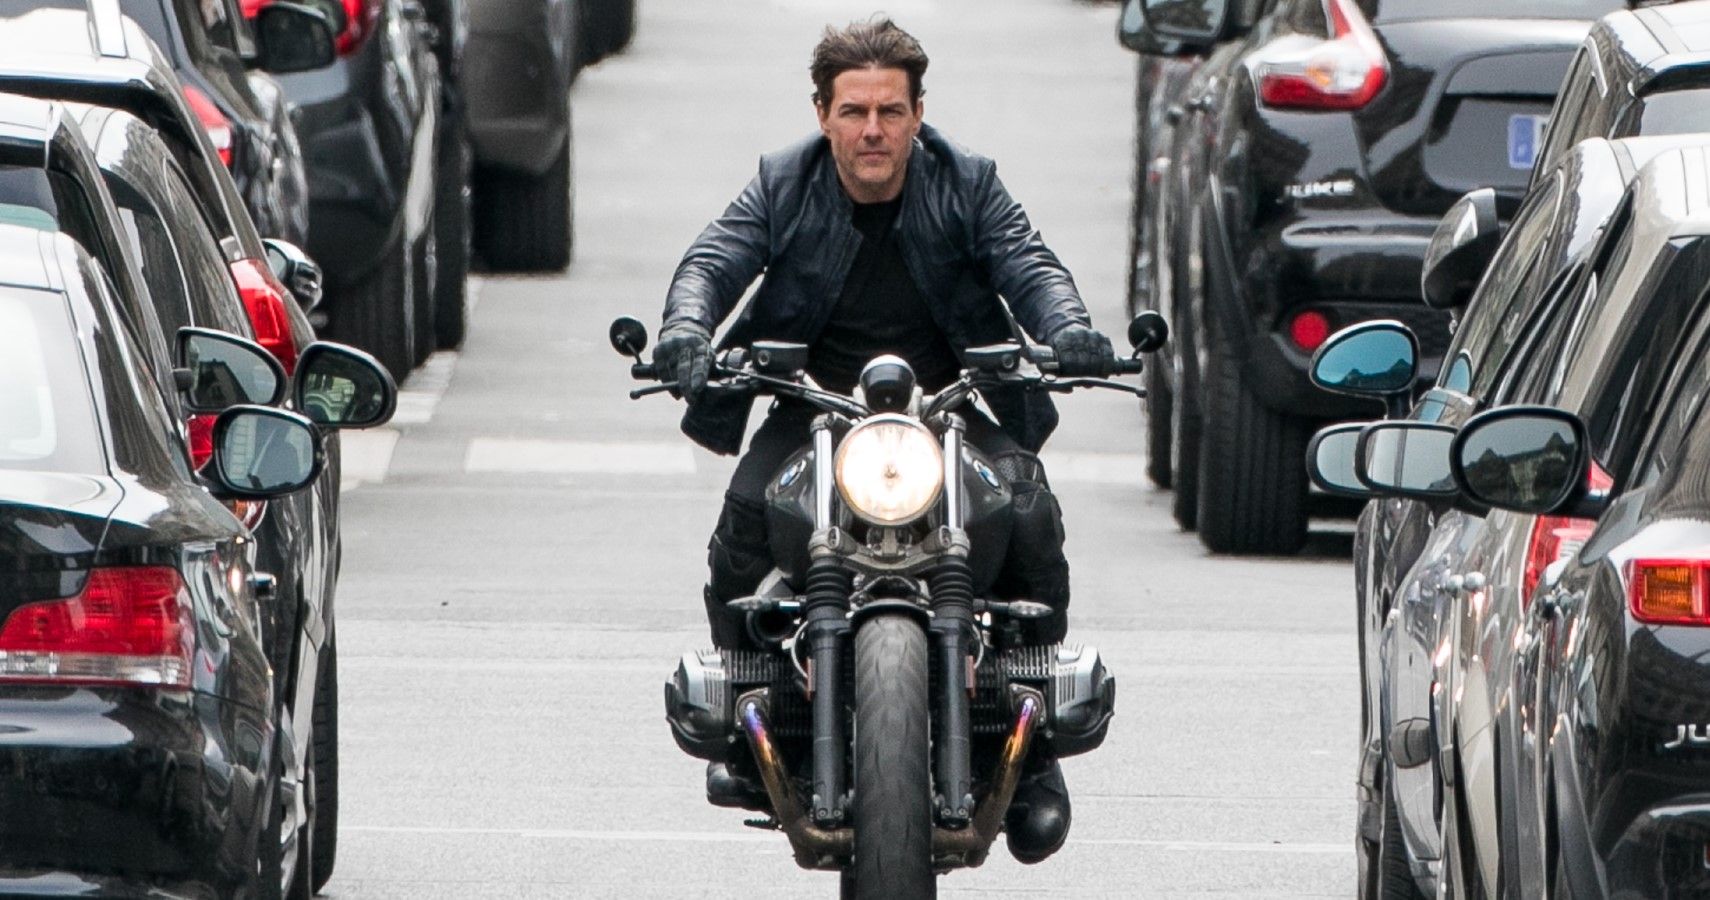 Tom Cruise BMW motorcycle stunt without a helmet